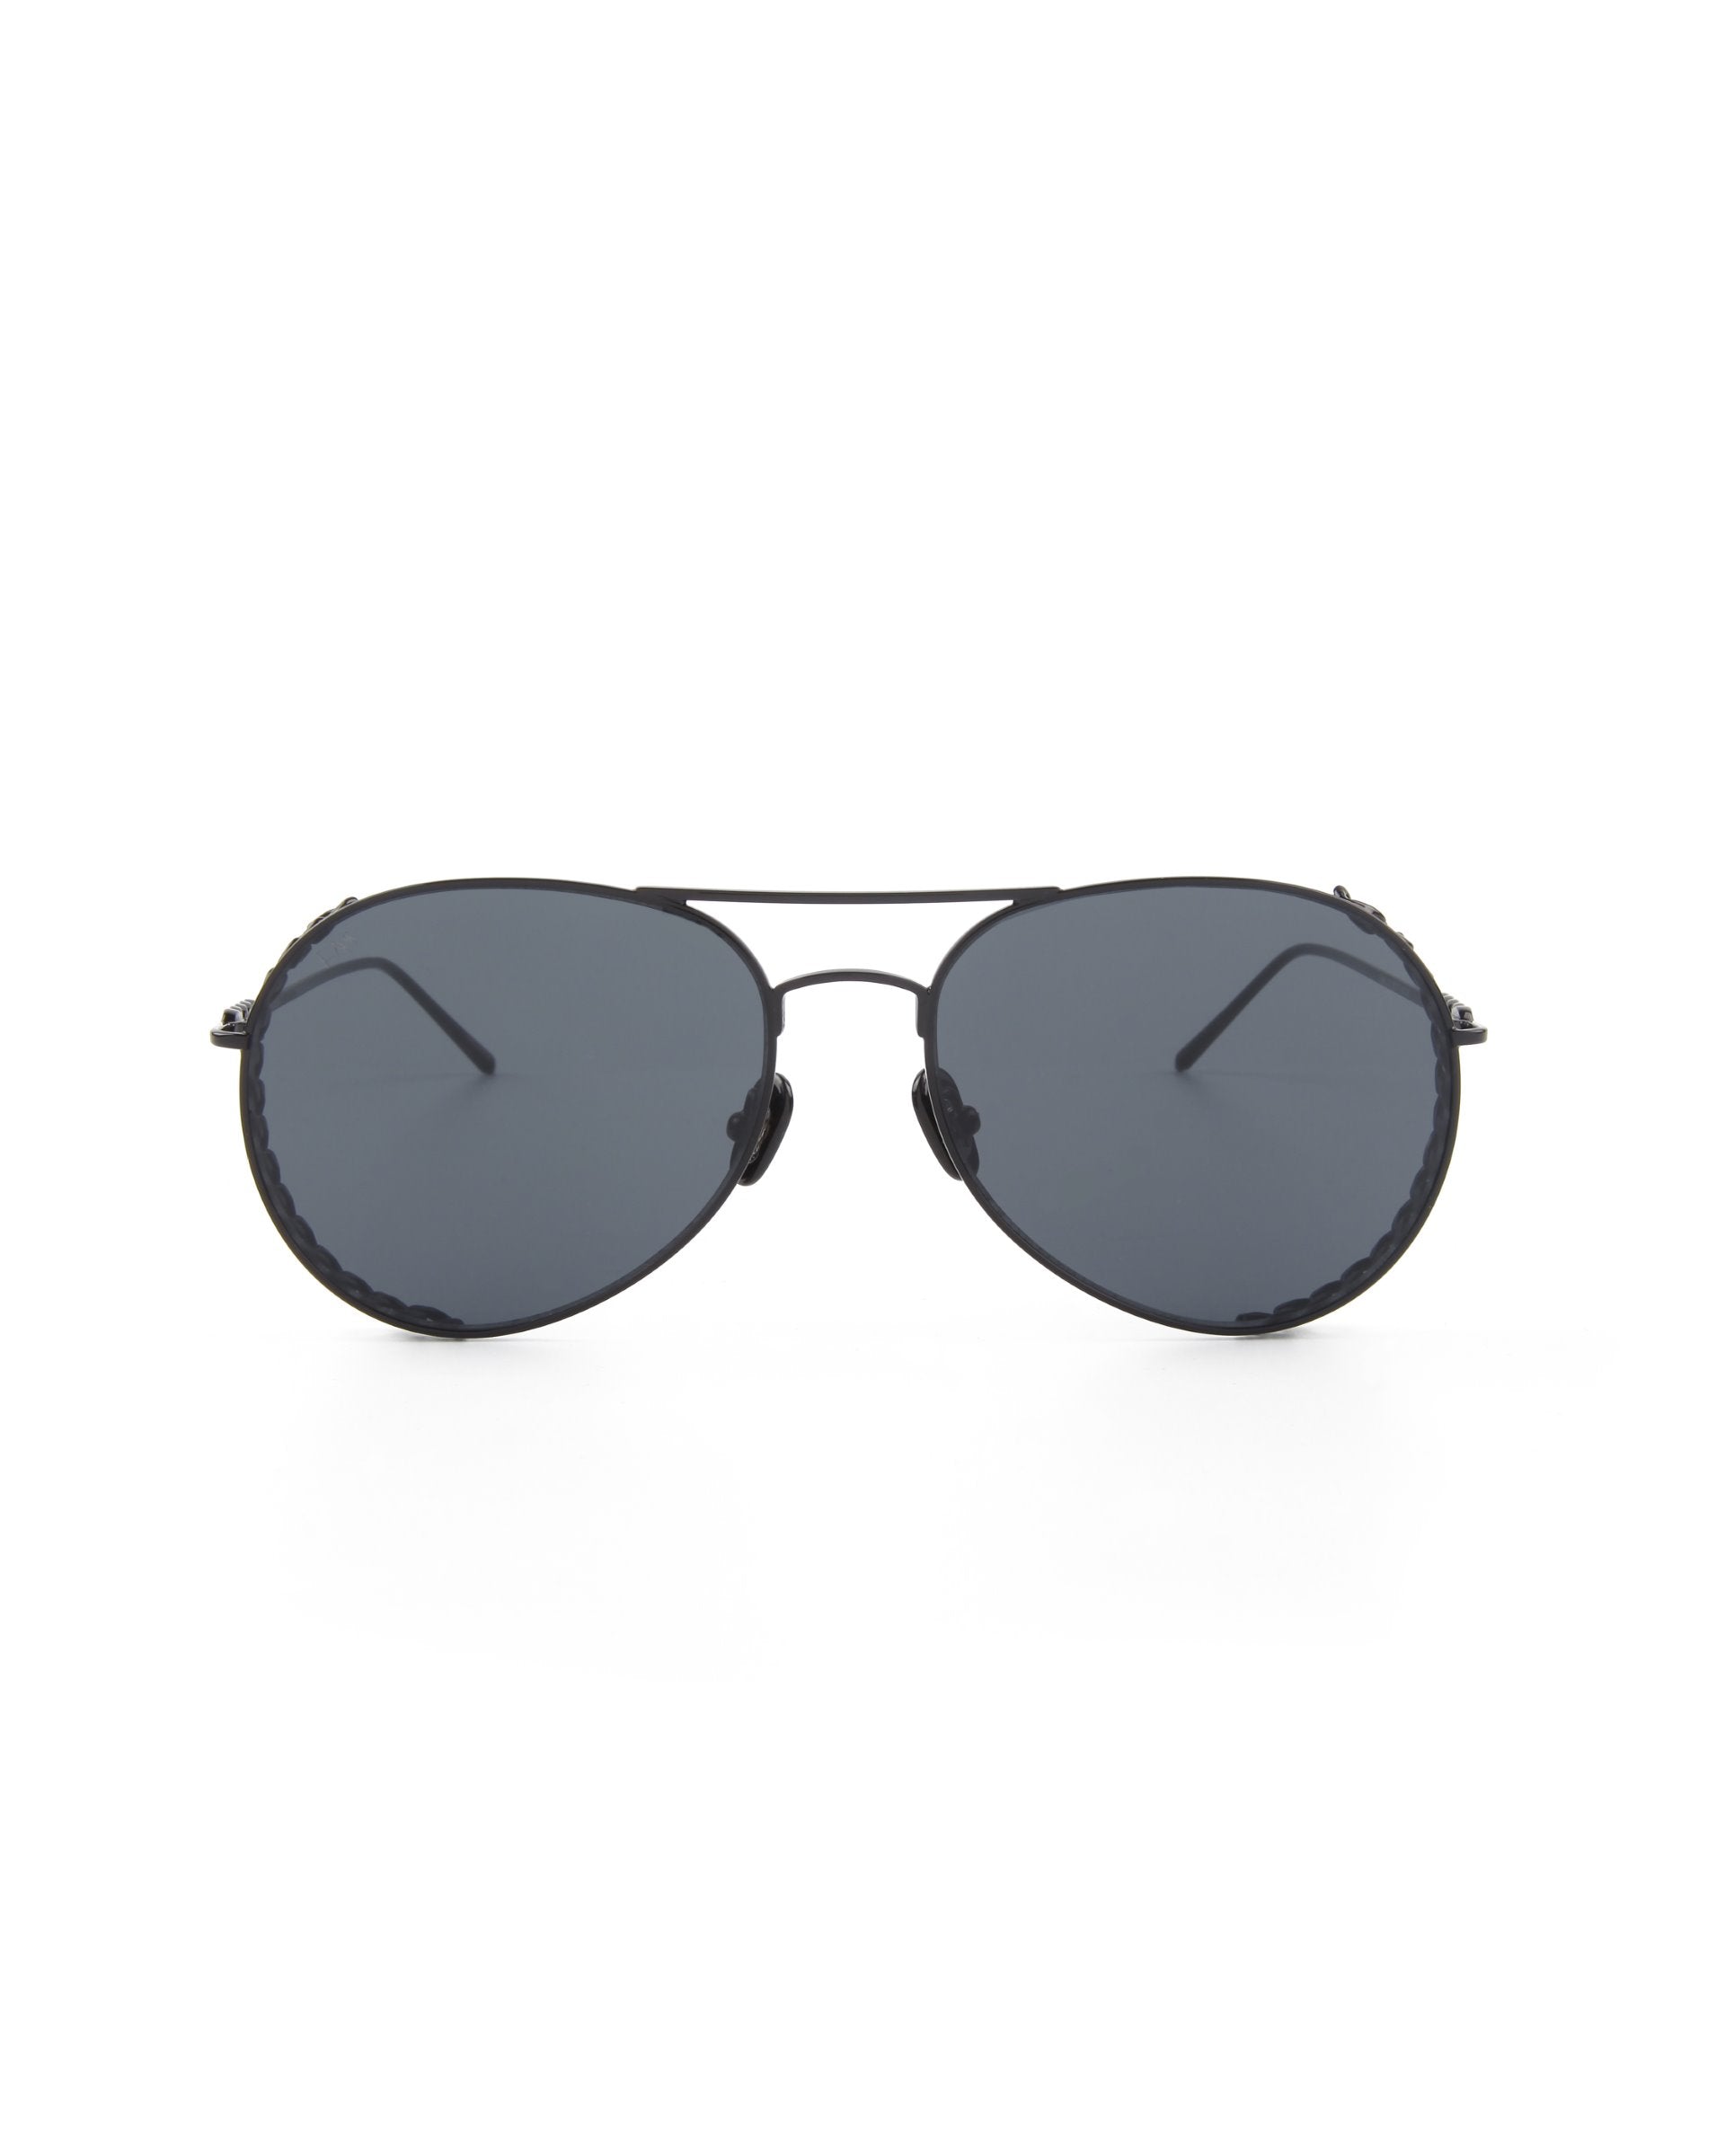 A pair of For Art&#39;s Sake® Links sunglasses with slightly convex nylon lenses and a sleek black metal frame. The sunglasses feature gold plated stainless steel temples and an adjustable nose bridge, designed for a classic and stylish look that enhances the traditional aviator style.